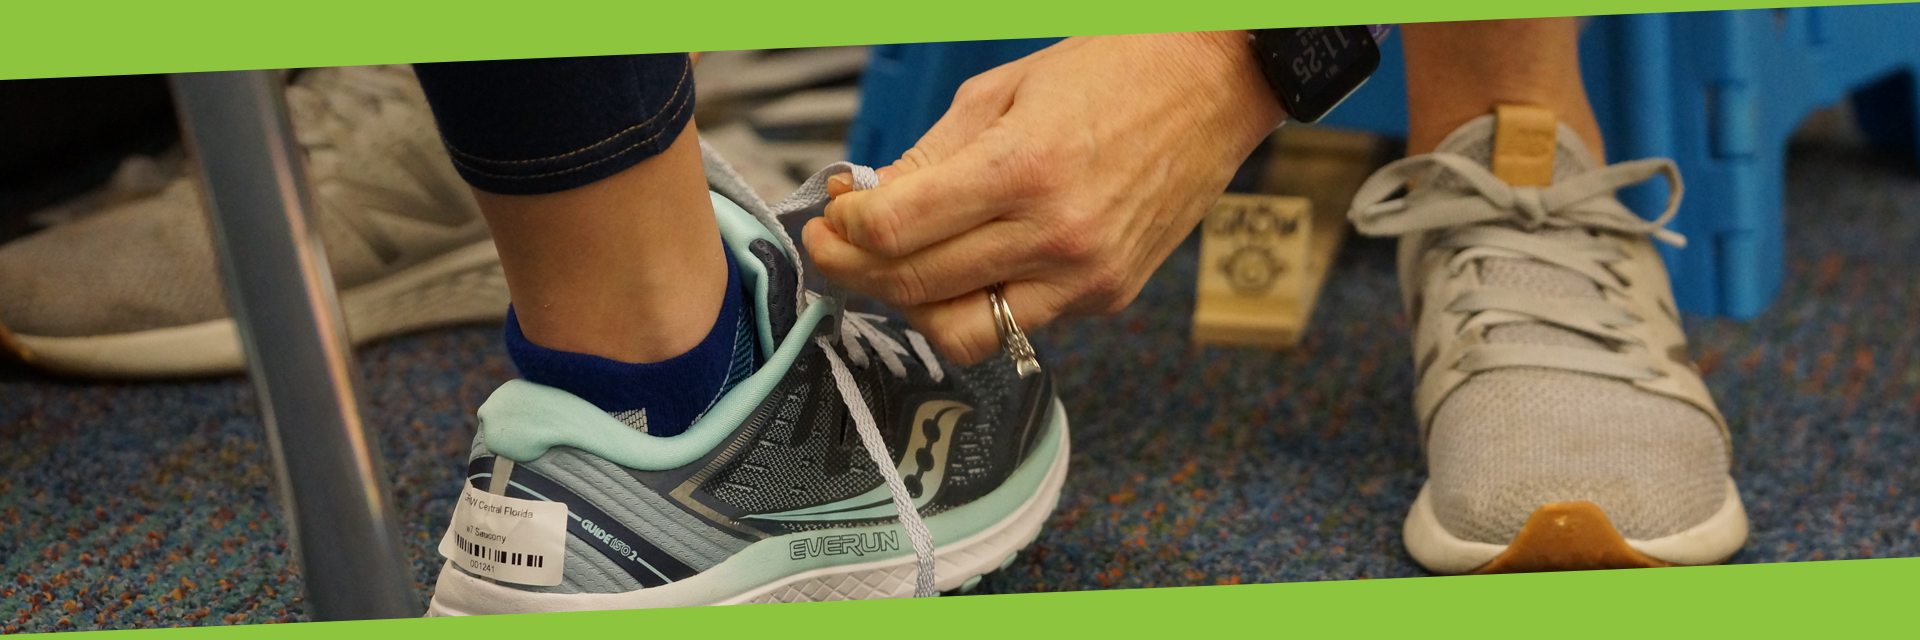 A volunteer tying the laces on a child's running shoes